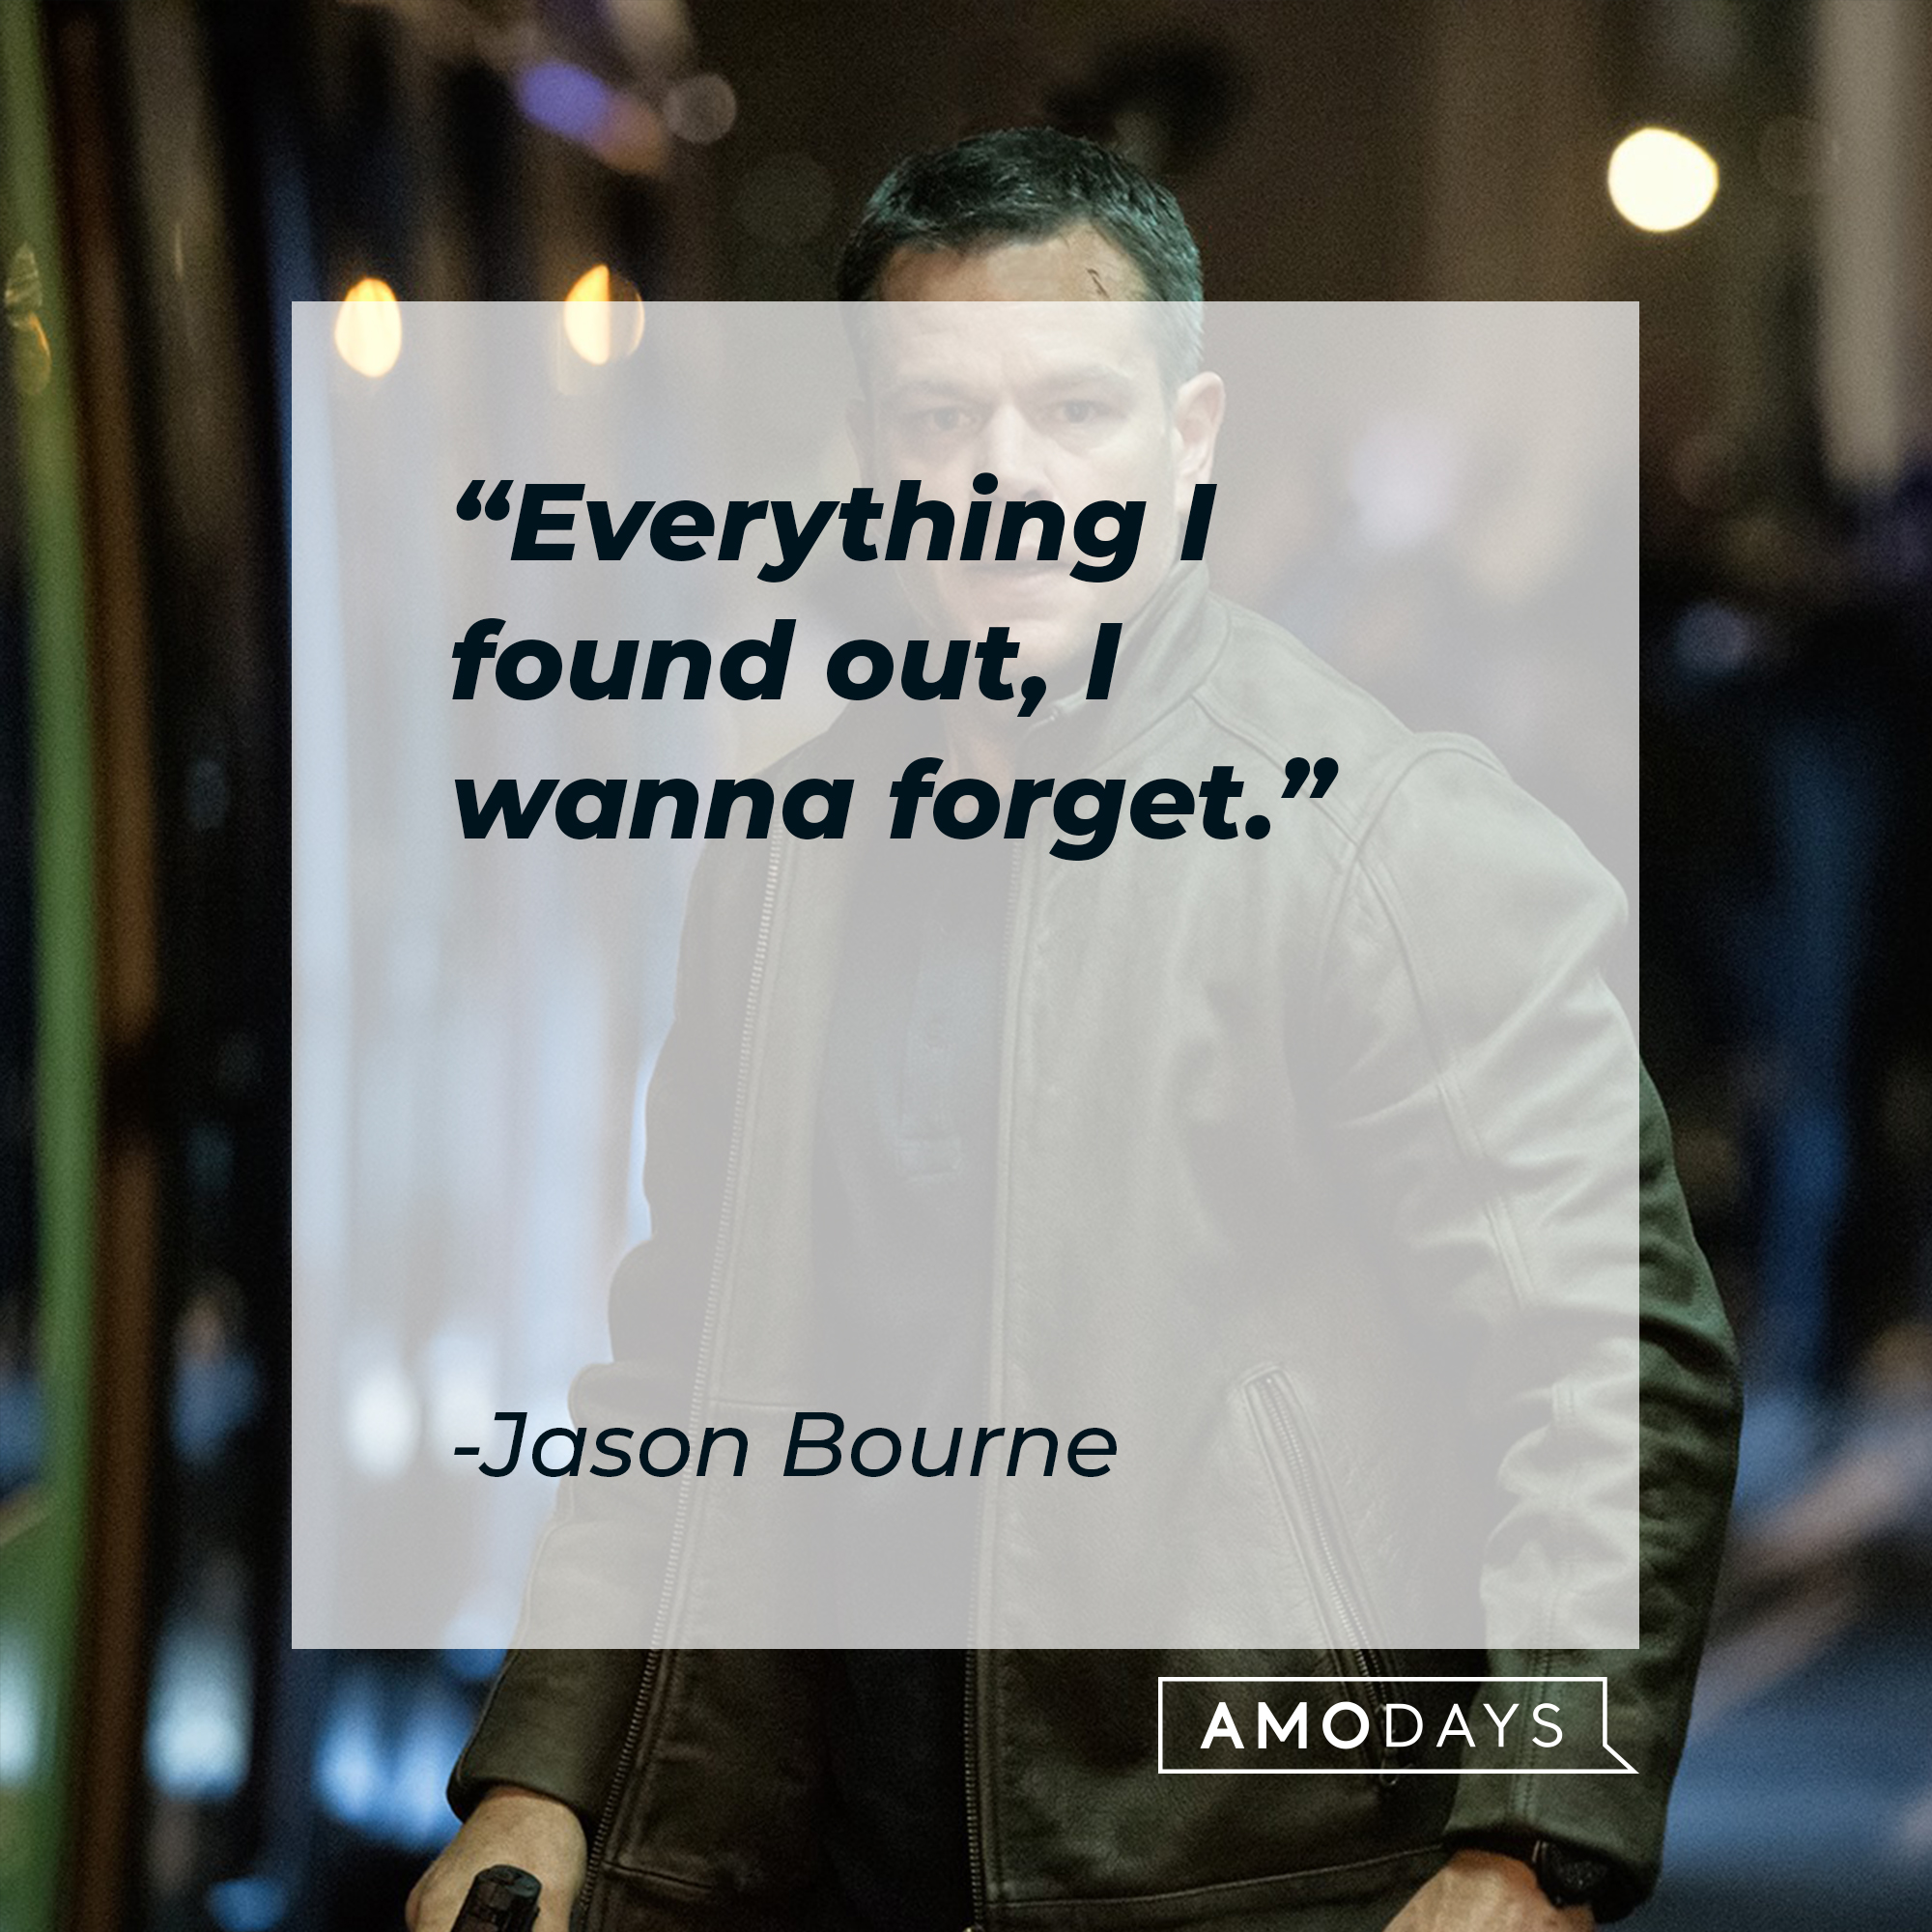 Jason Bourne's quote: "Everything I found out, I wanna forget." | Source: facebook.com/TheBourneSeries